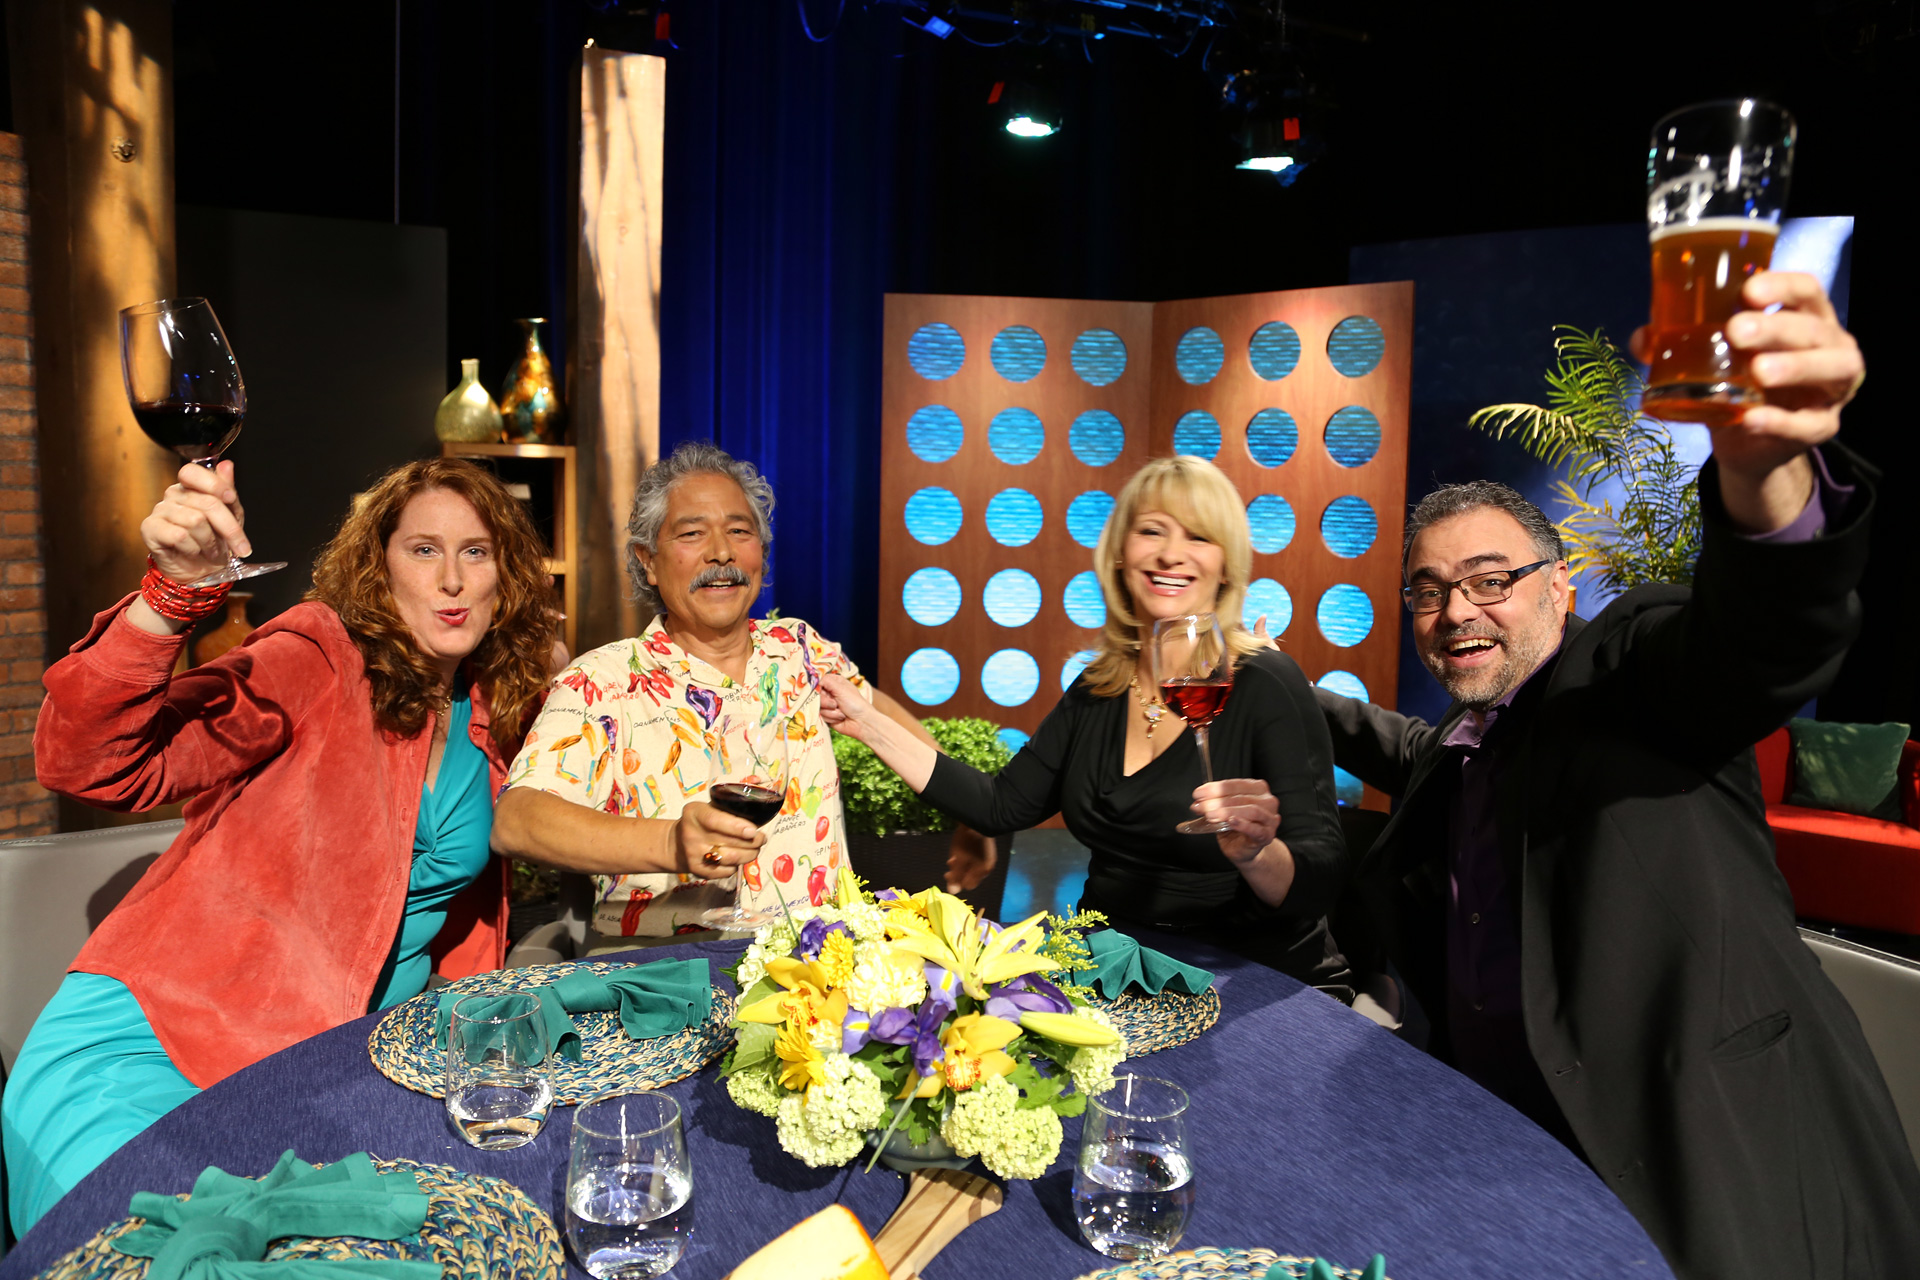 Host Leslie Sbrocco and guests having fun on the set of the episode 13 of season 11.